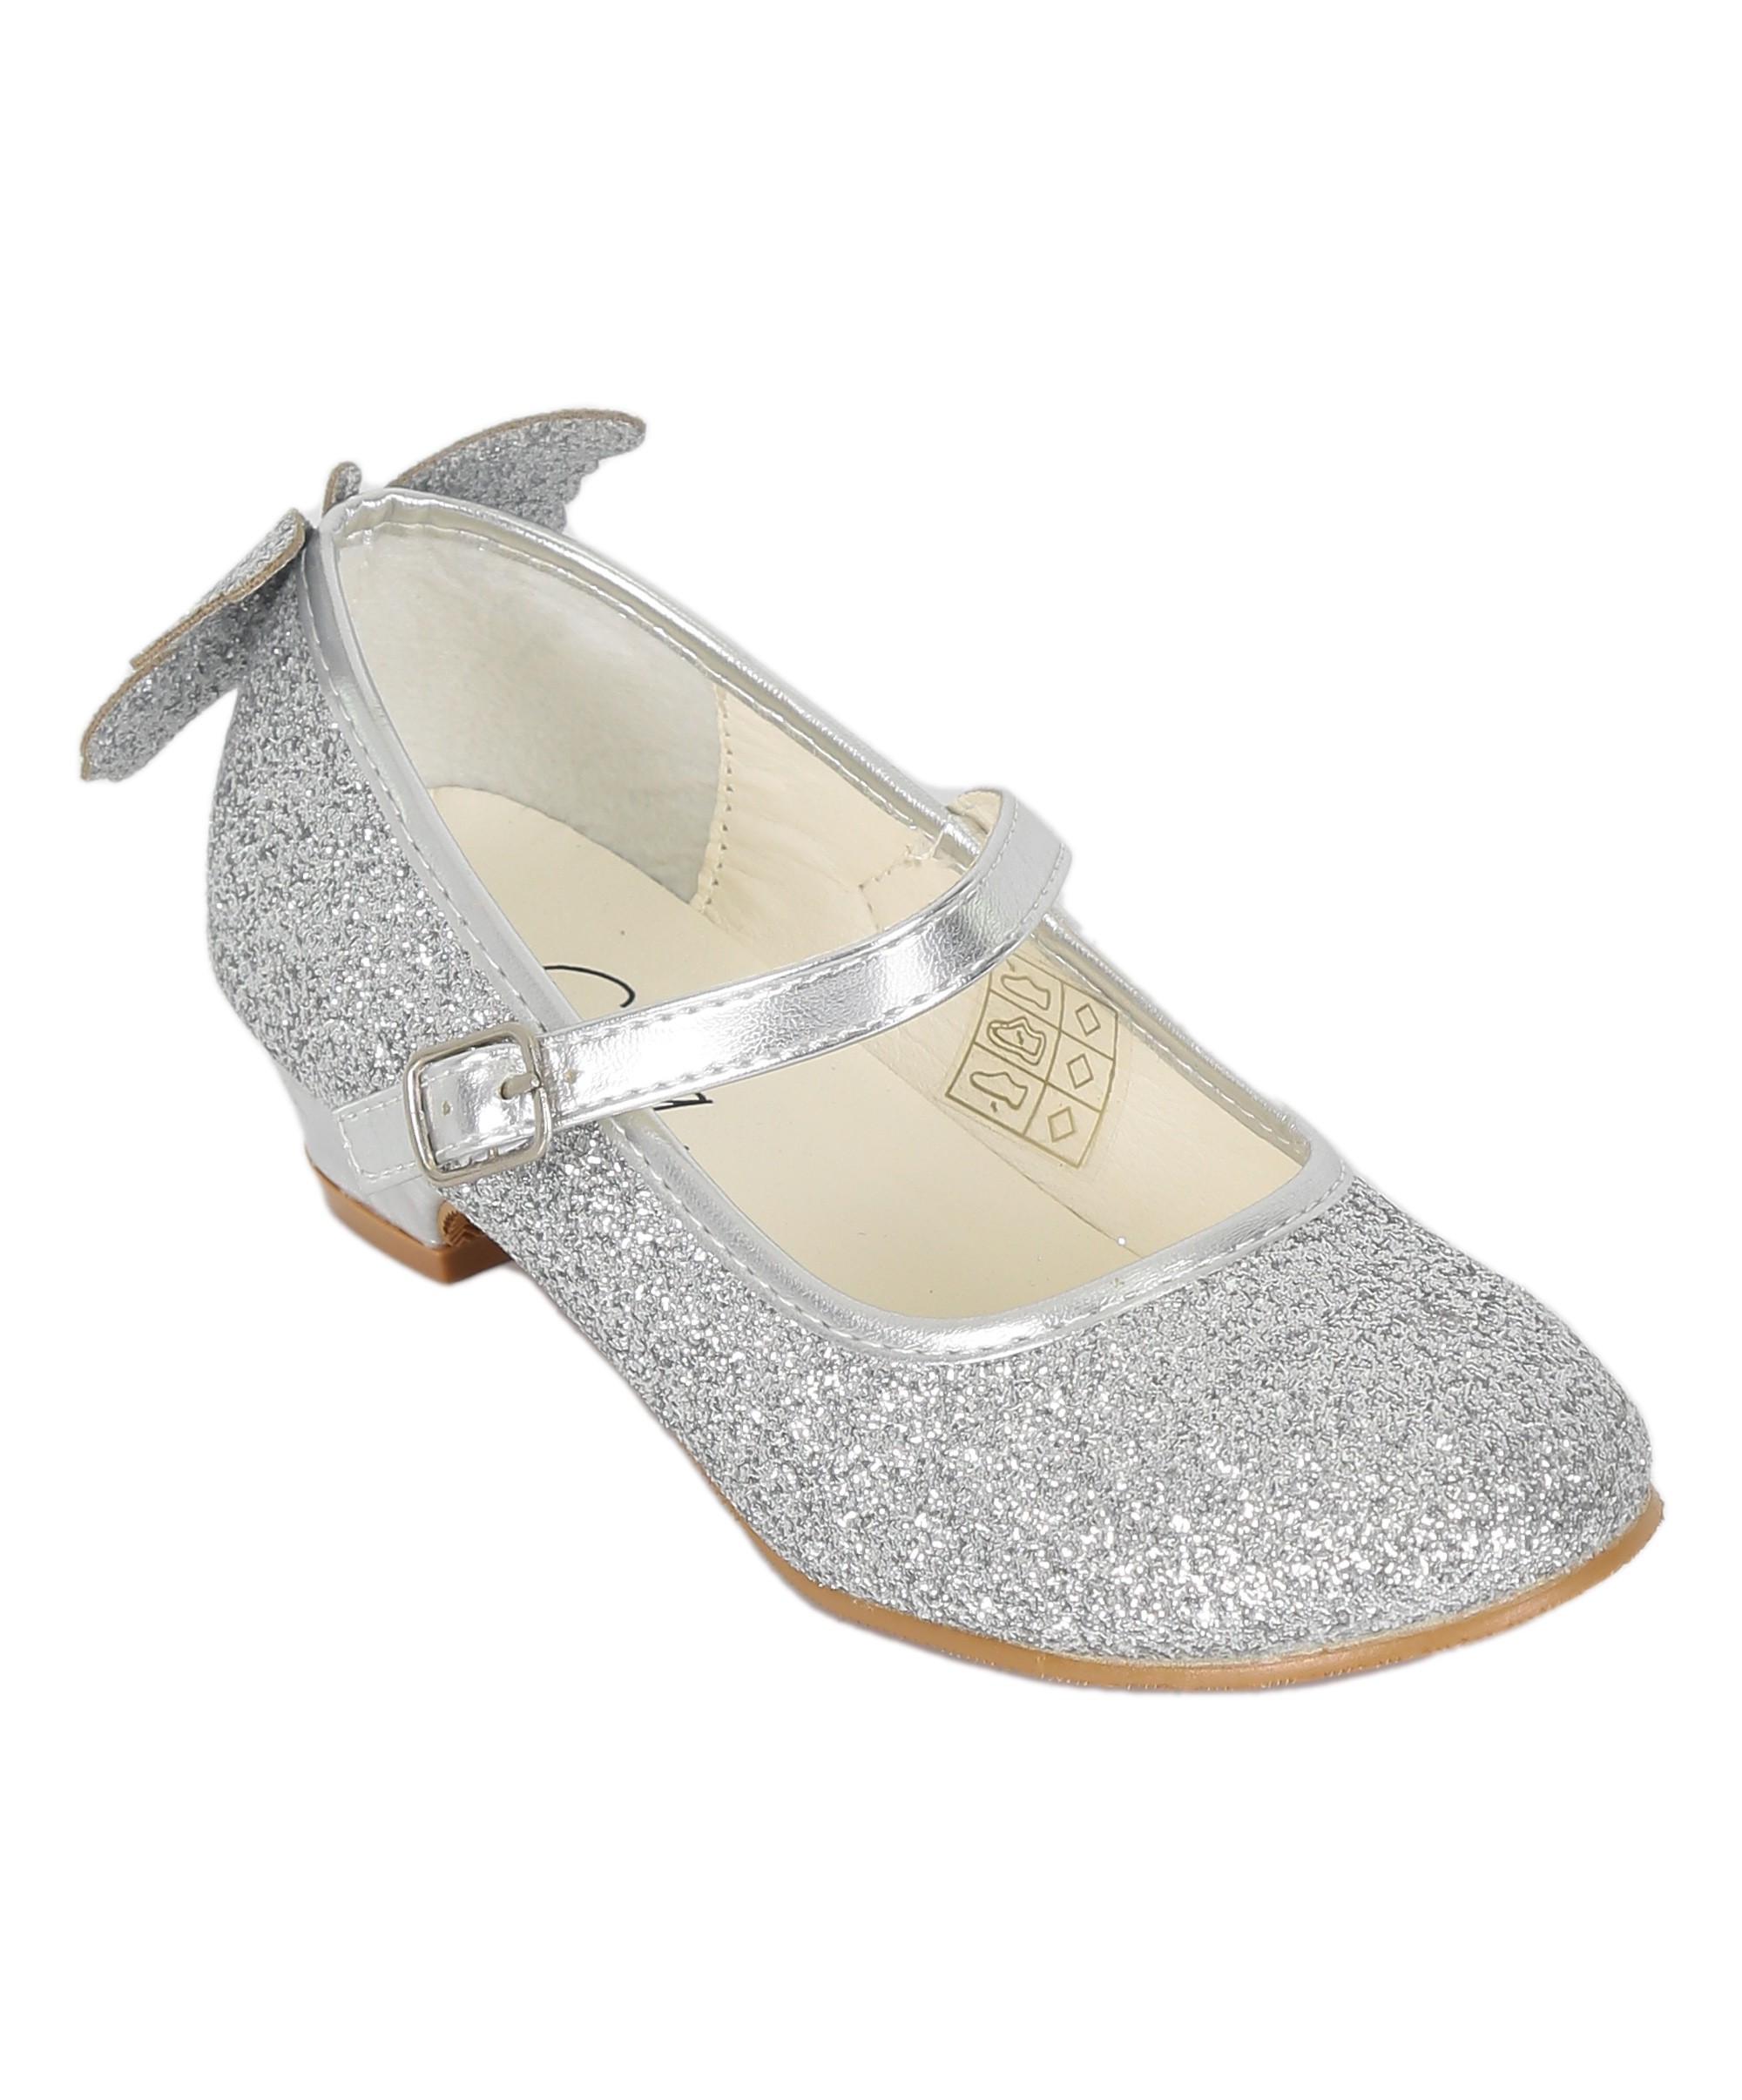 Girls' Sparkly Medium Heel Mary Jane Ankle Strap Shoes - ANNA